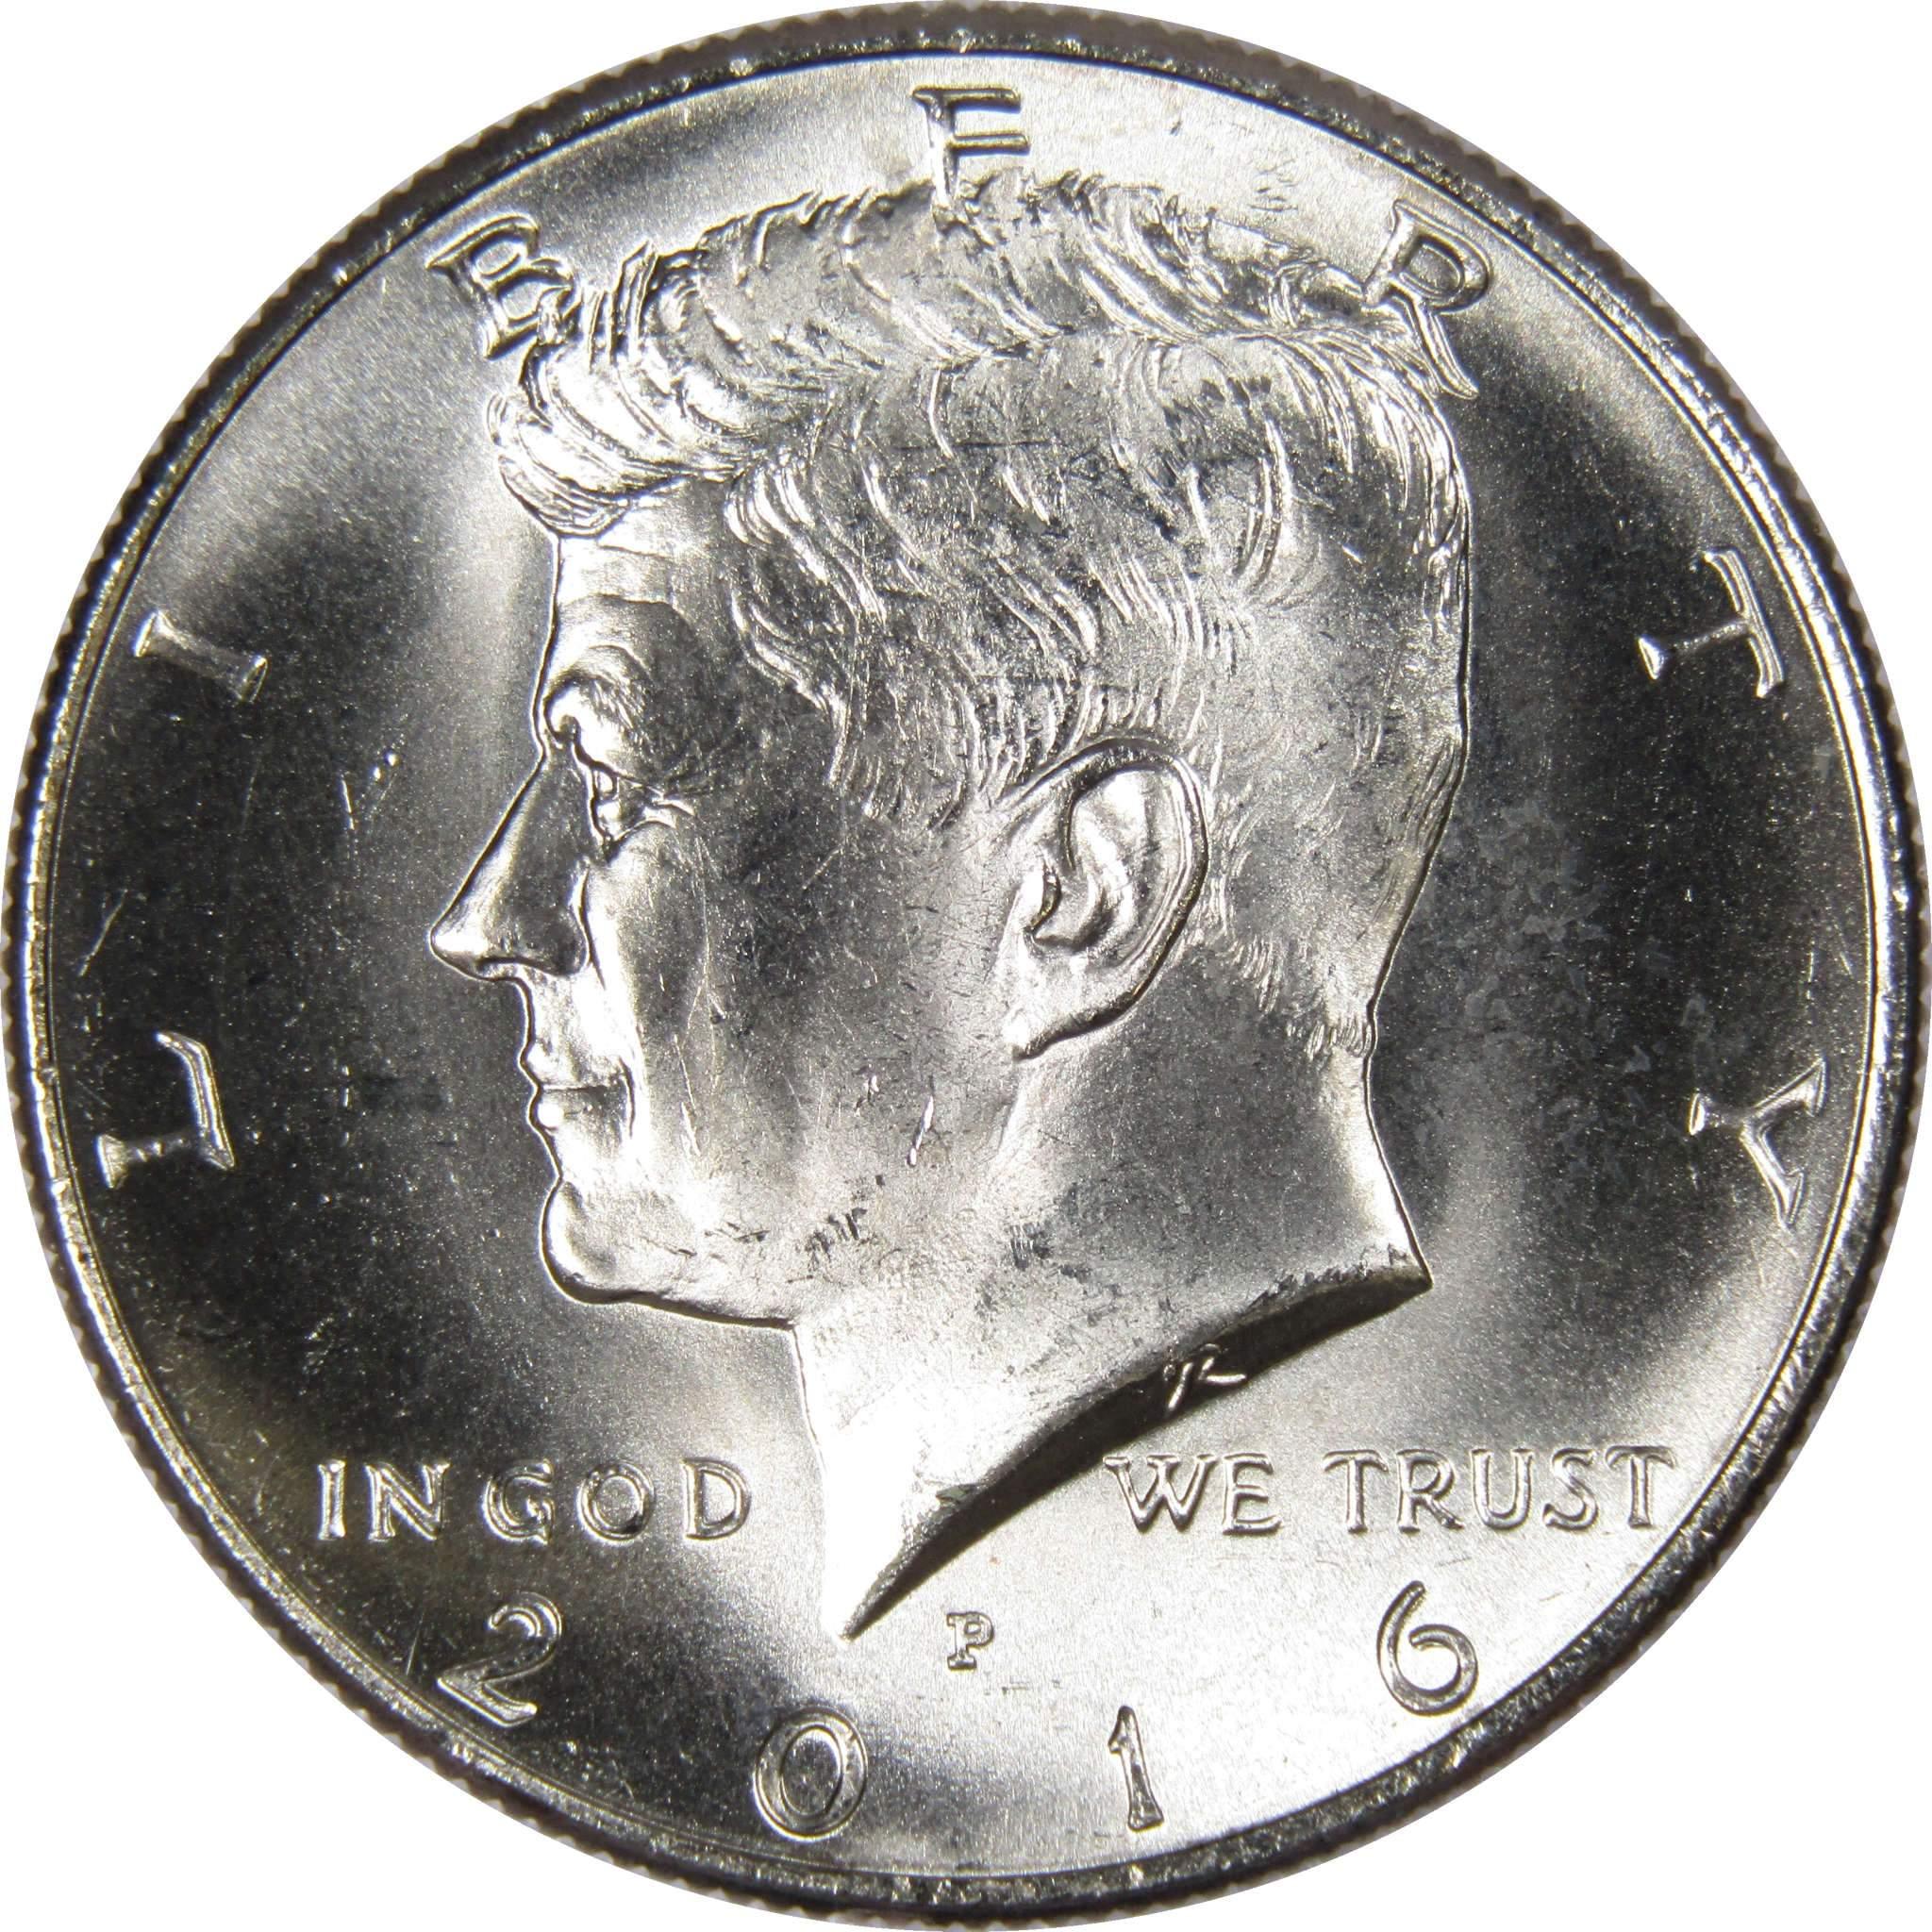 2016 P Kennedy Half Dollar BU Uncirculated Mint State 50c US Coin Collectible